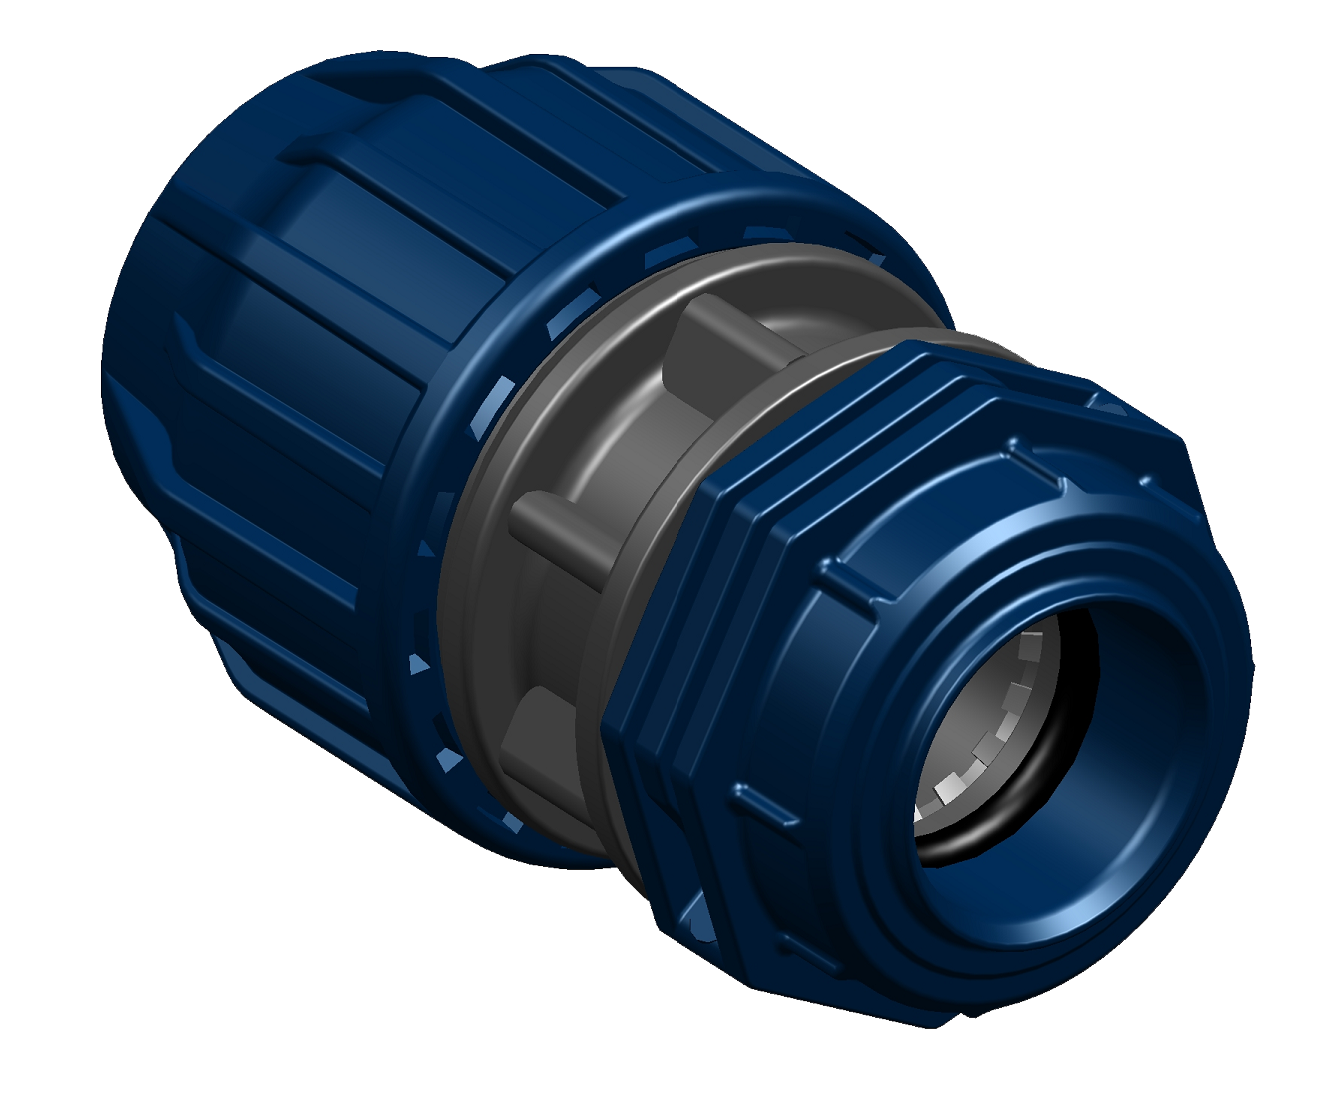 A 3D rendering of a metric compression universal adaptor.